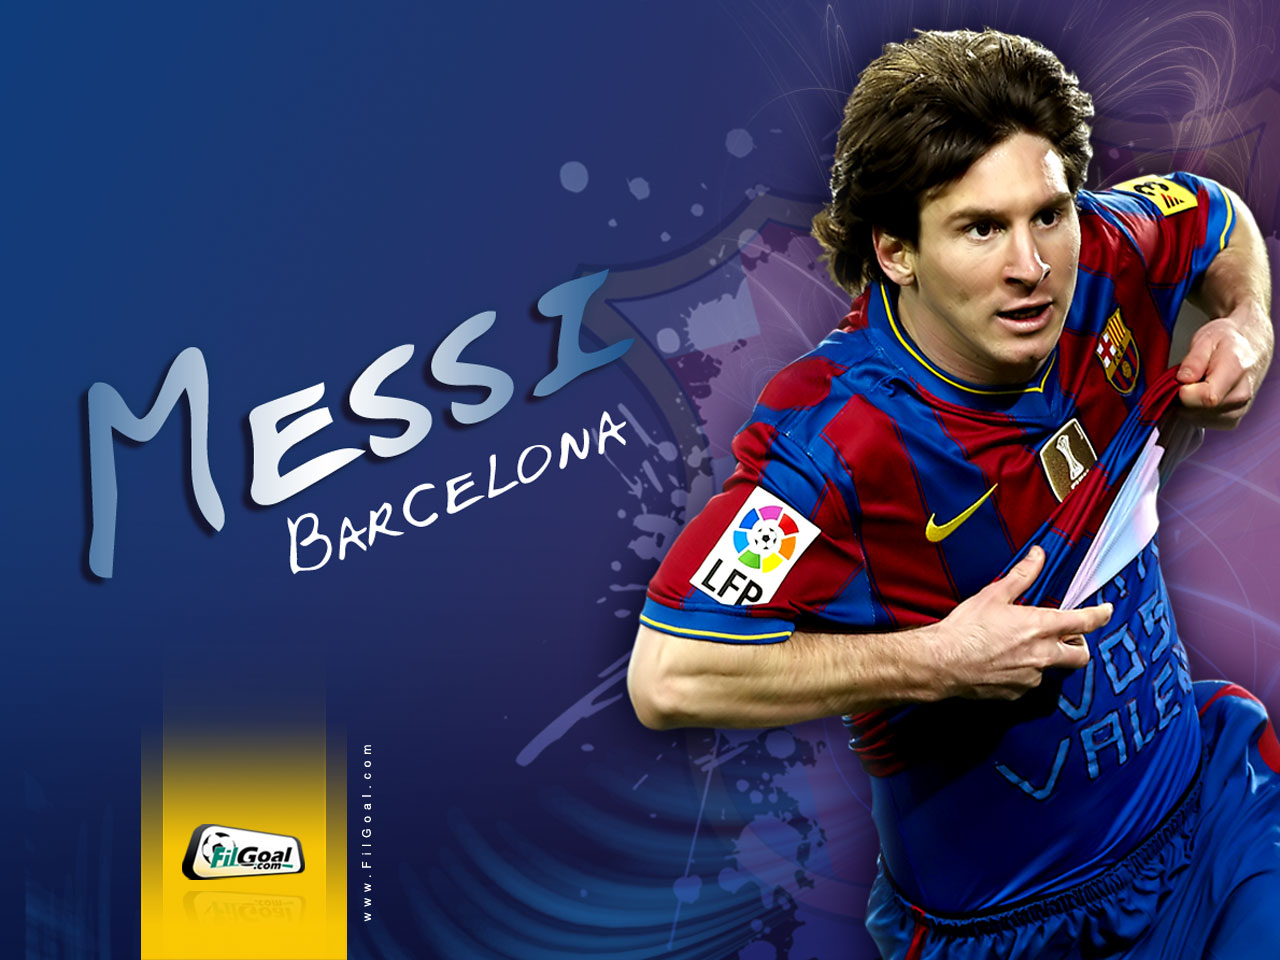 Wallpaper Pemain Bola Hd - Football Player Messi Images Download , HD Wallpaper & Backgrounds